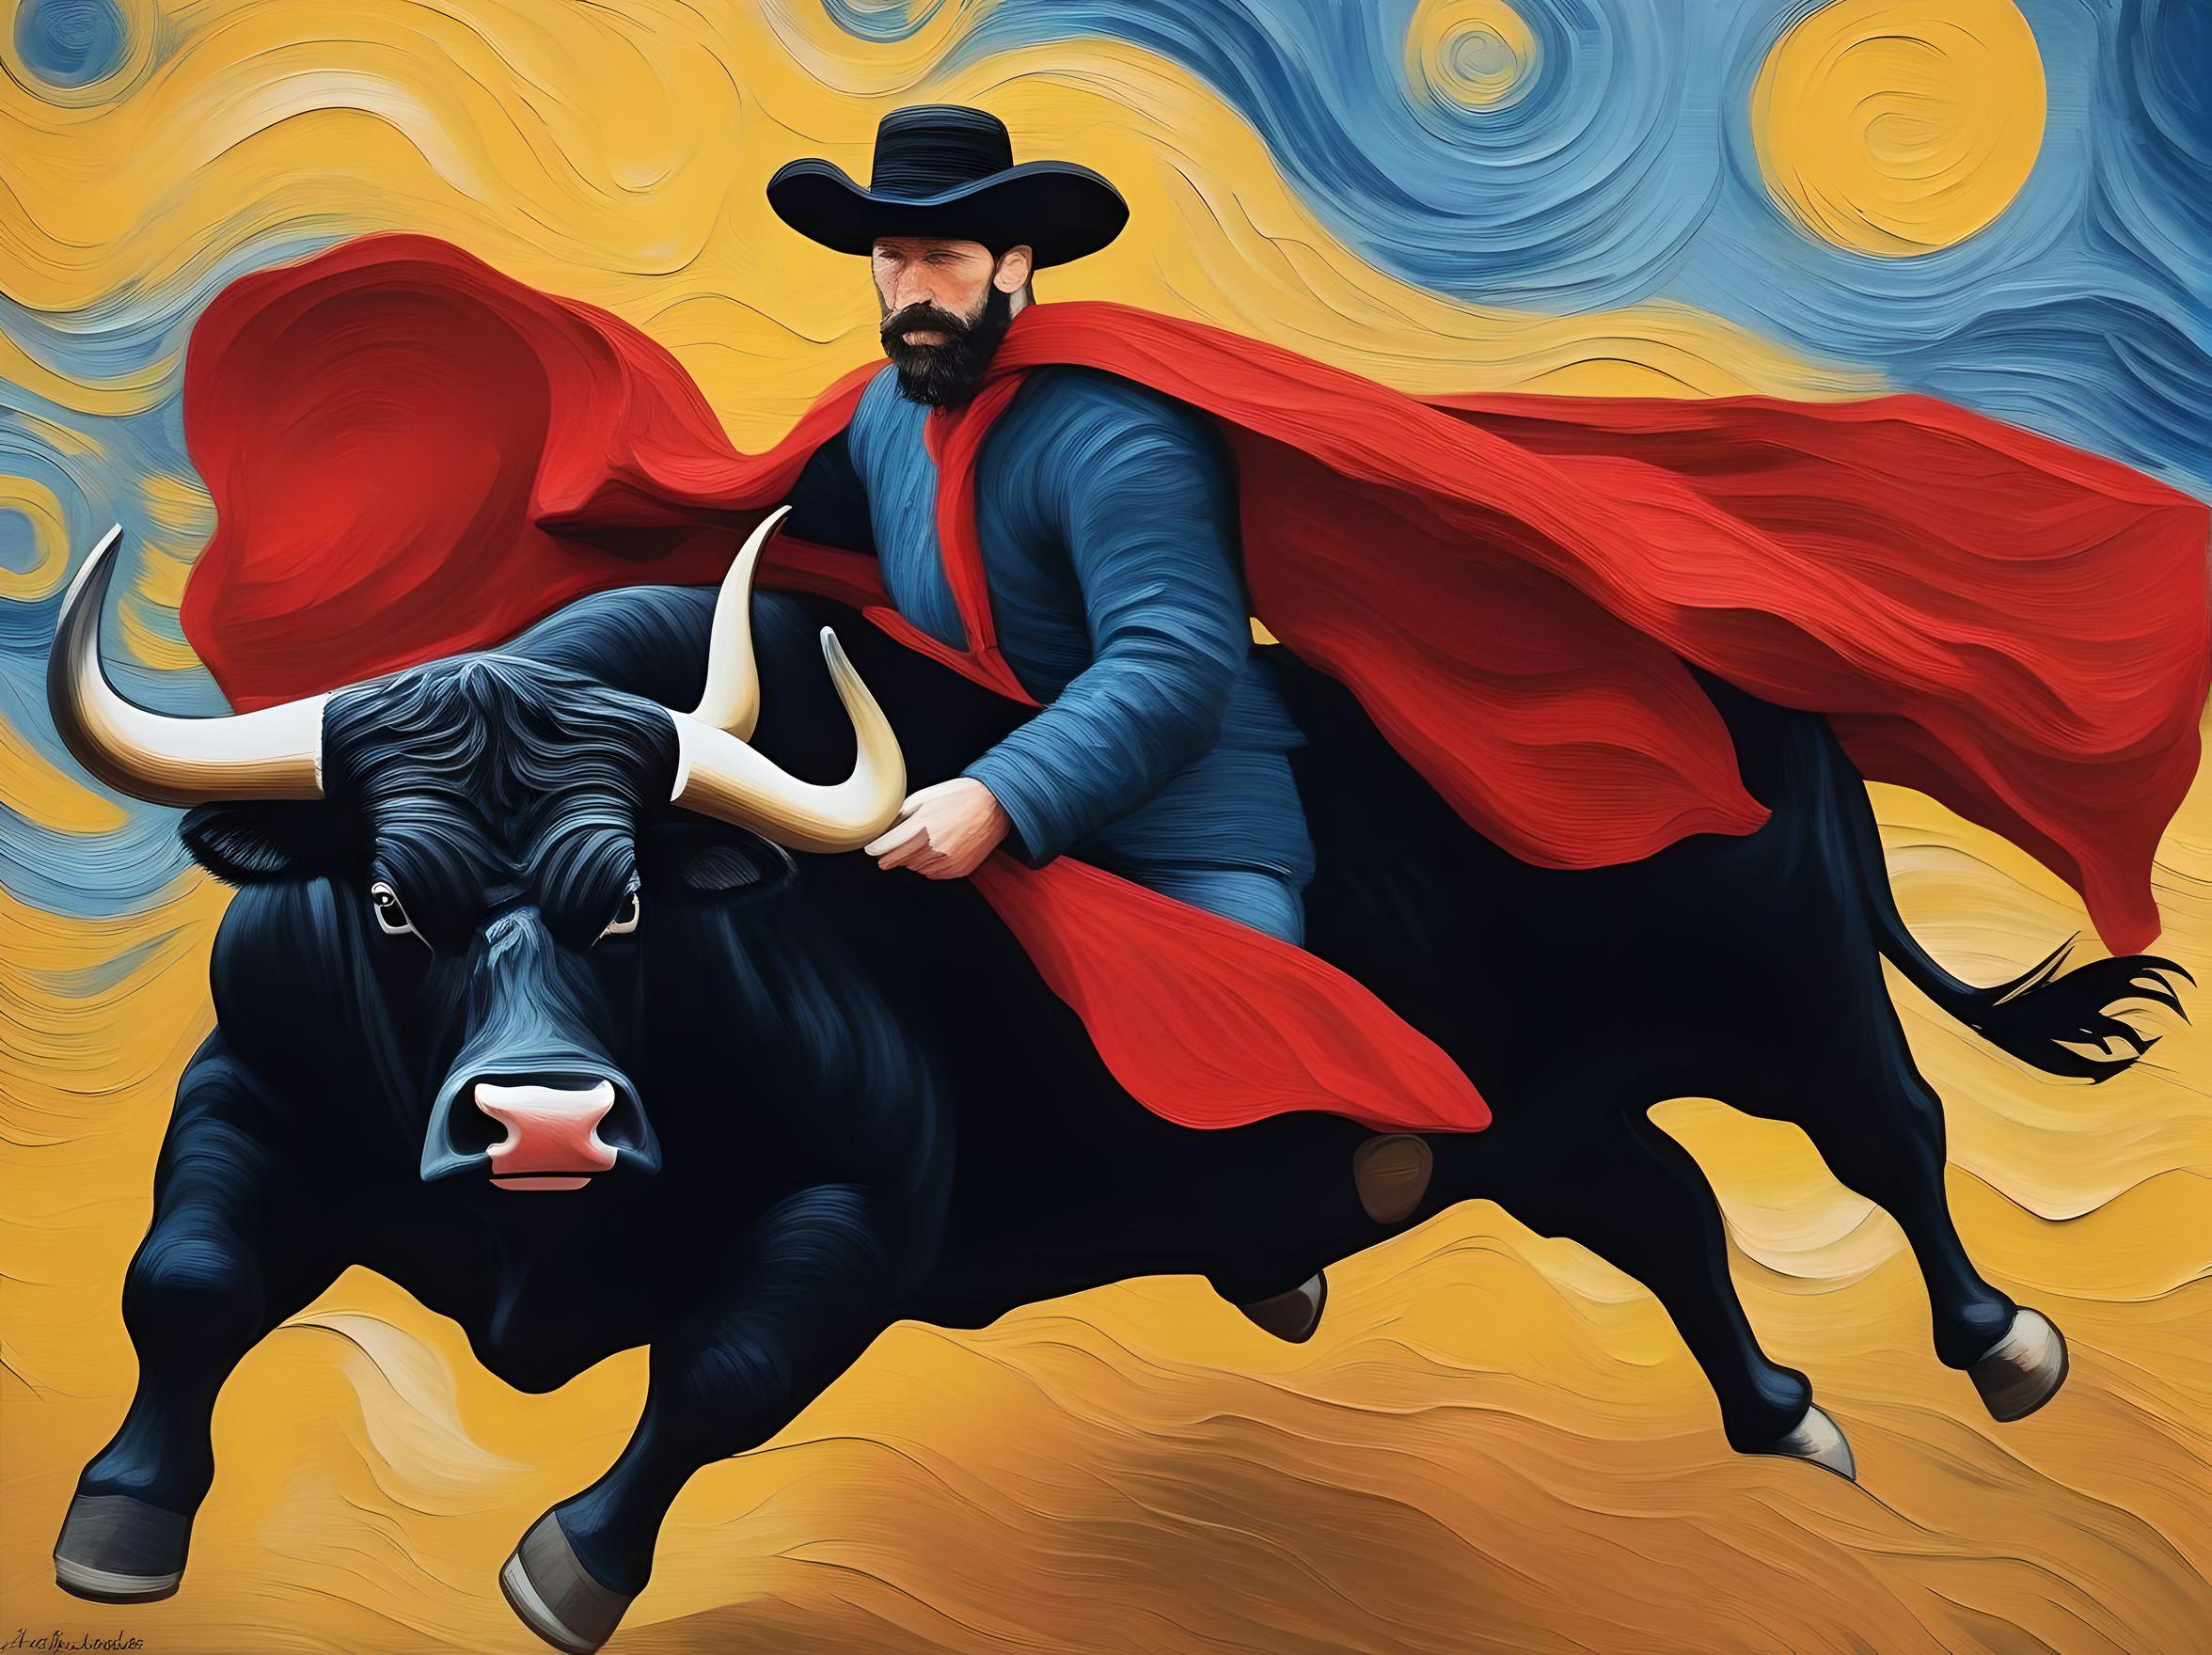 Bull Fighter with Swirling Red Cape and Charging Black Bull